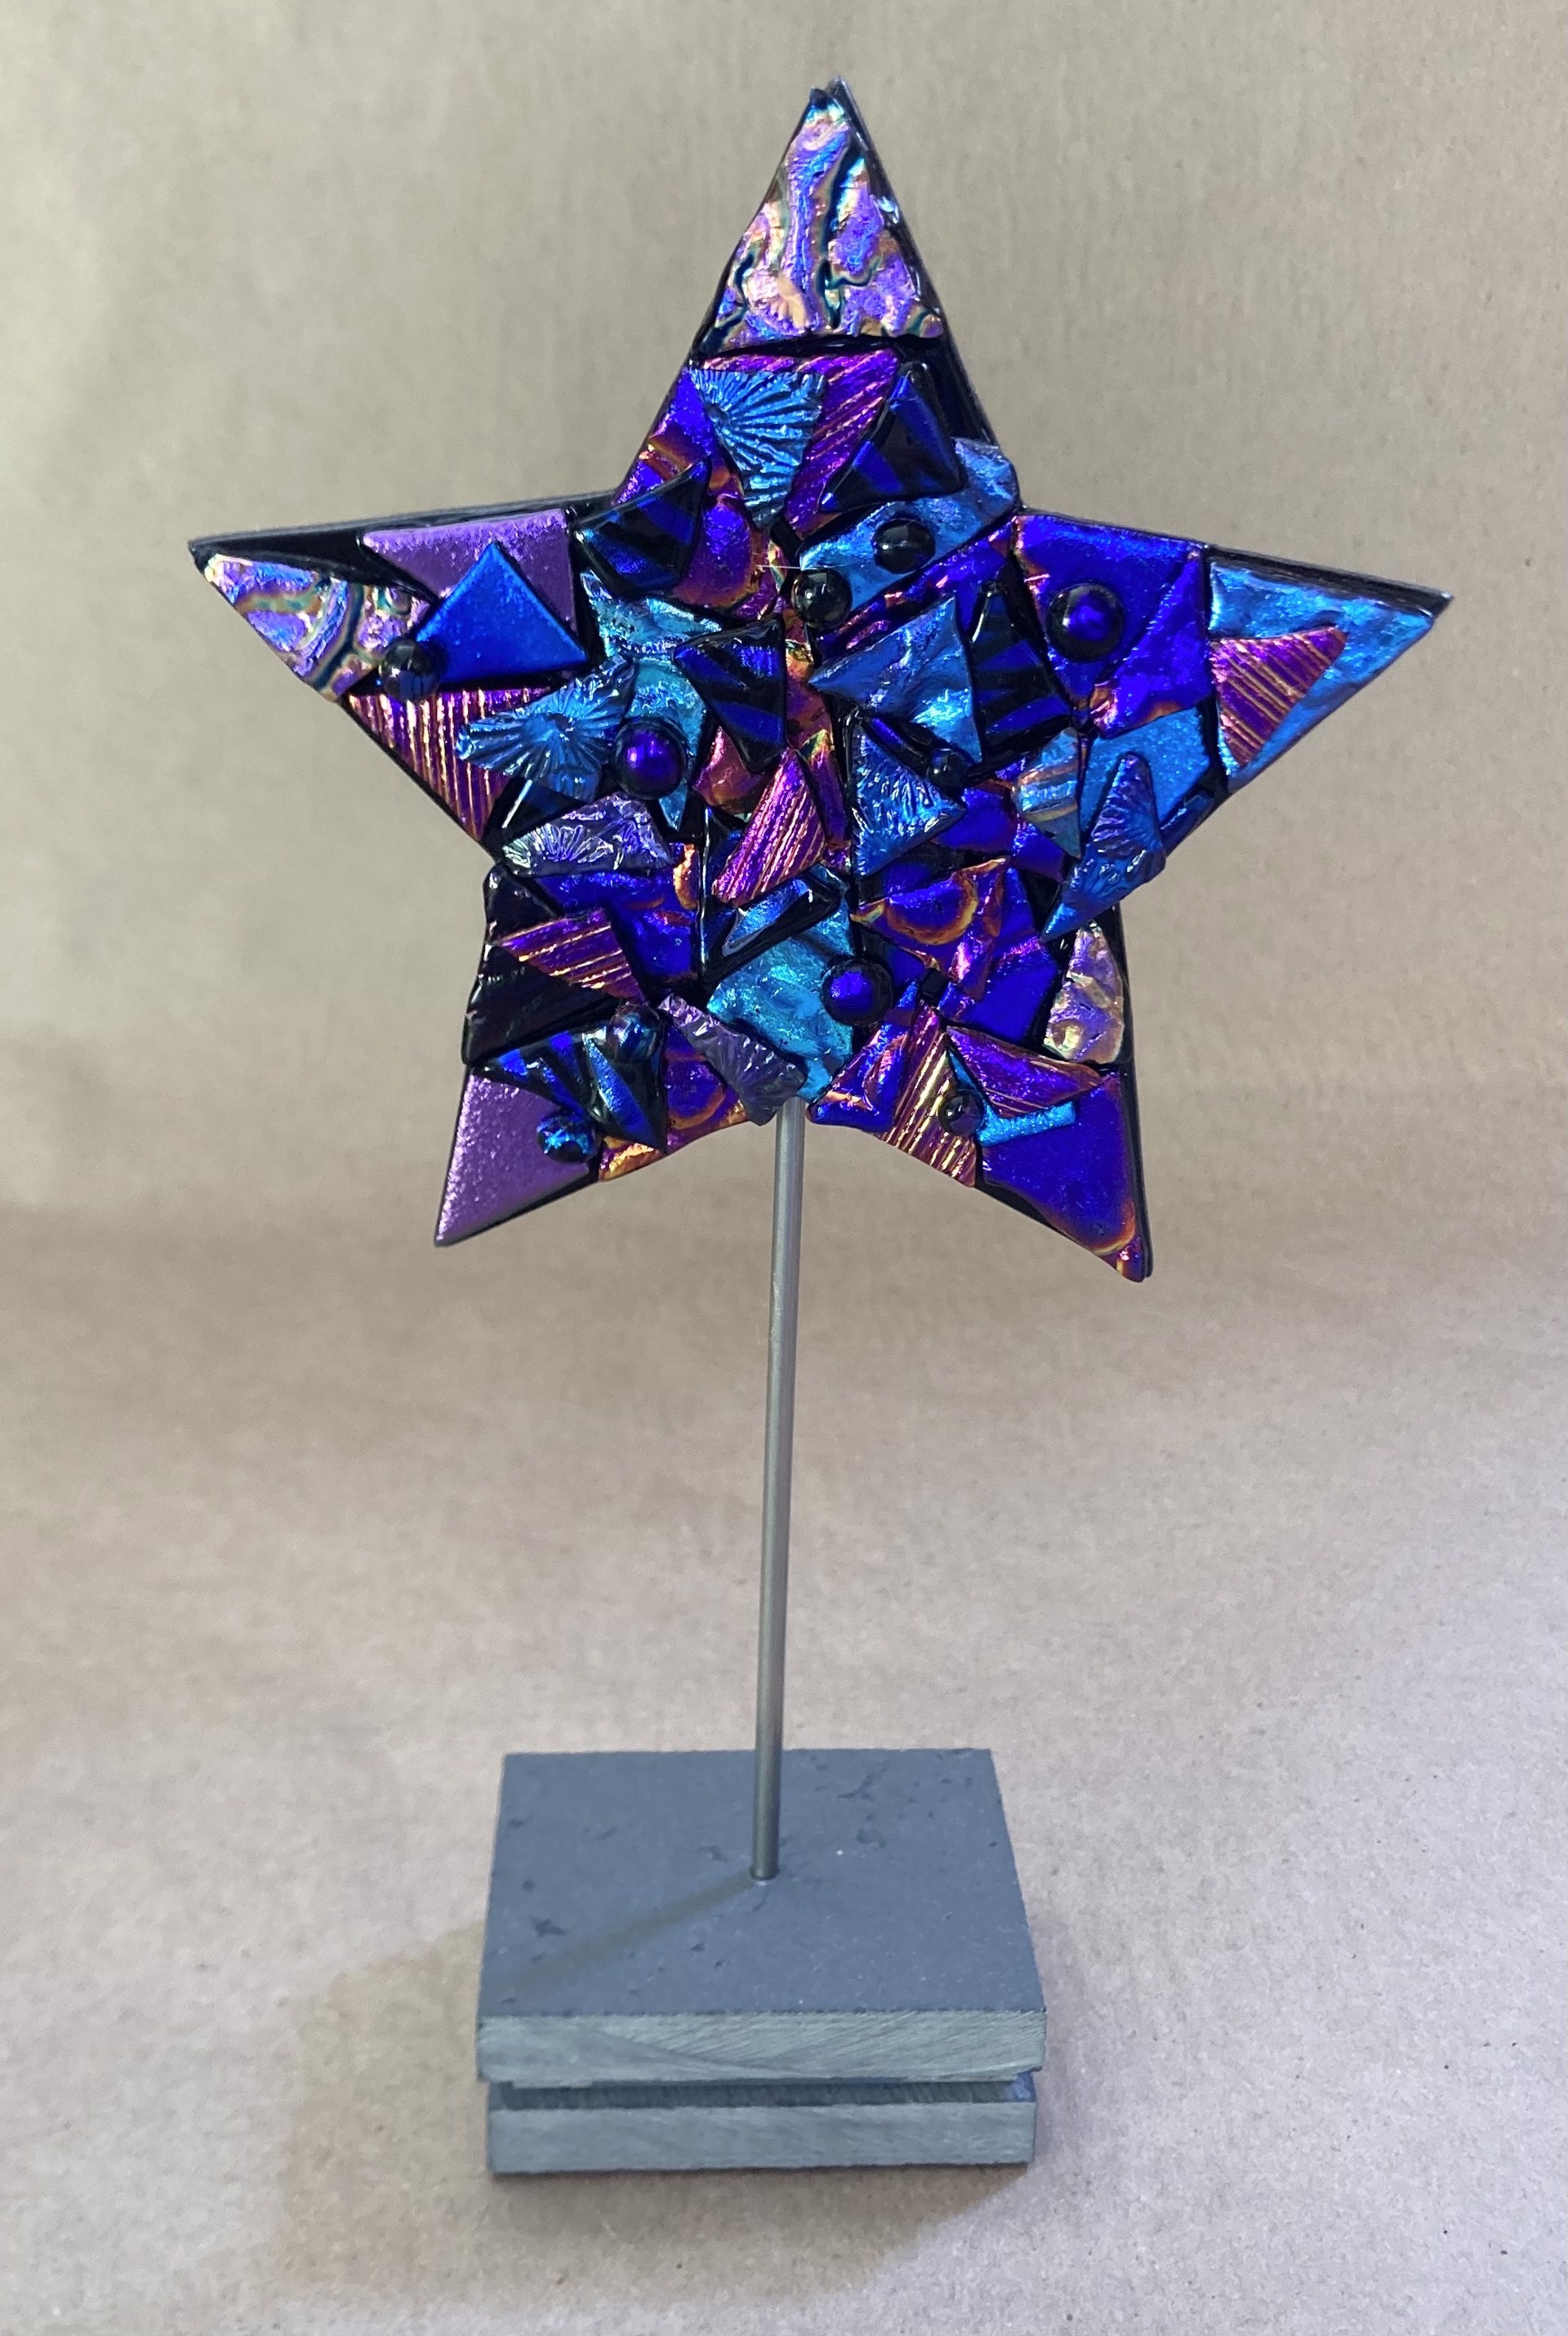 Star on Stand #1 by Doug and Barbara Henderson